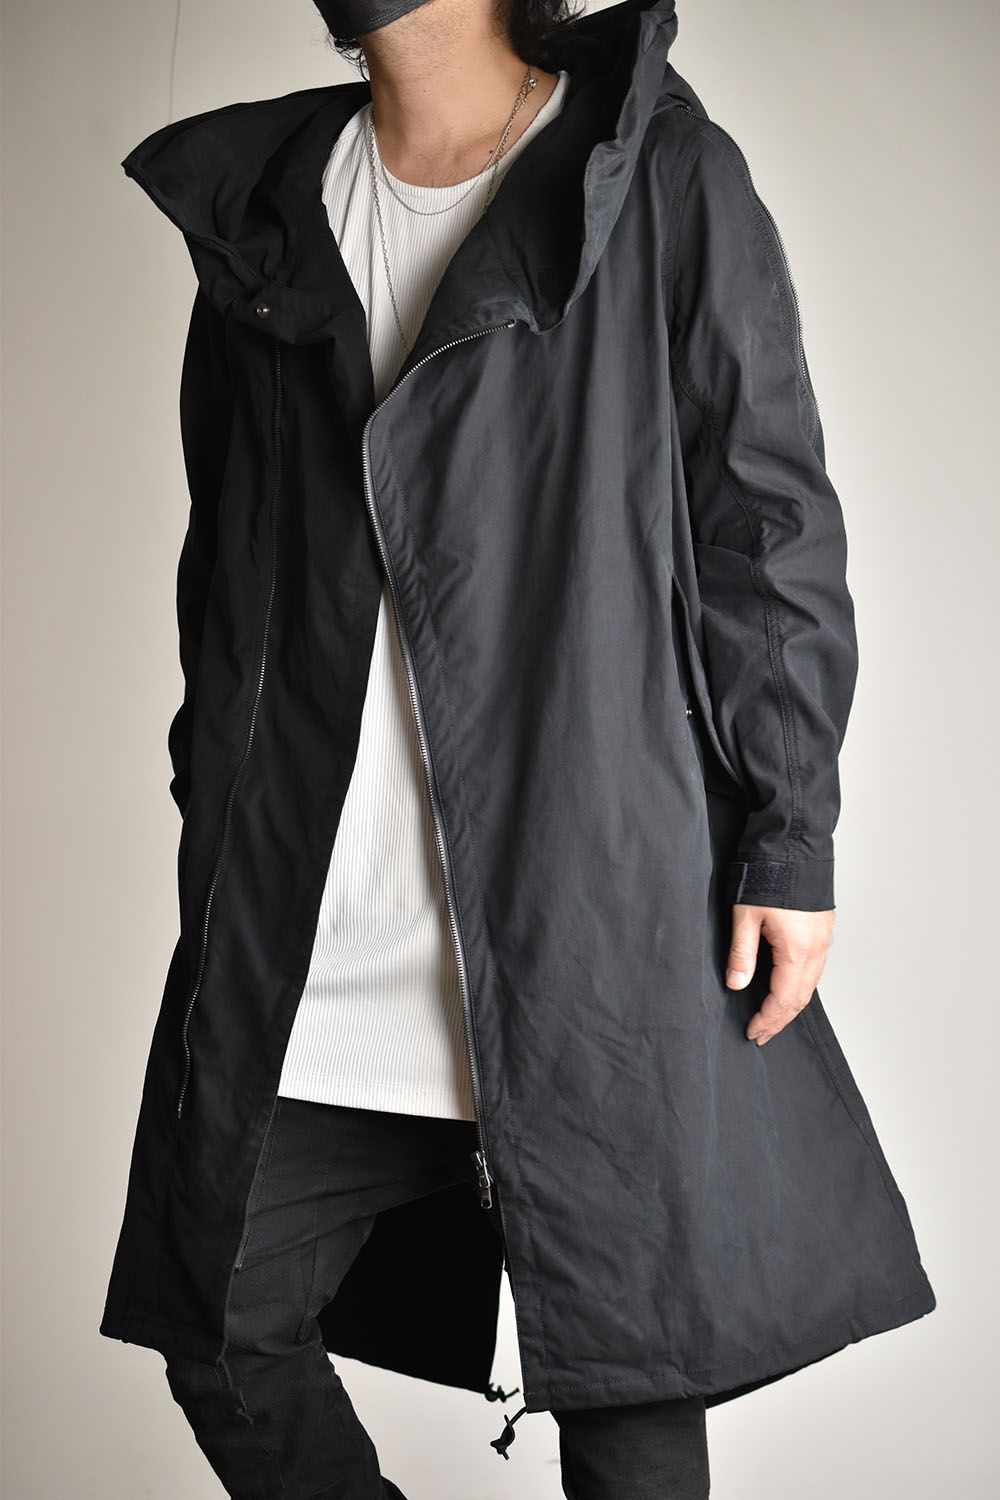 MULTI ZIP MILITARY HOODIE COAT - WITHOUT PATCHES"Black"/マルチジップミリタリーコート"ブラック"